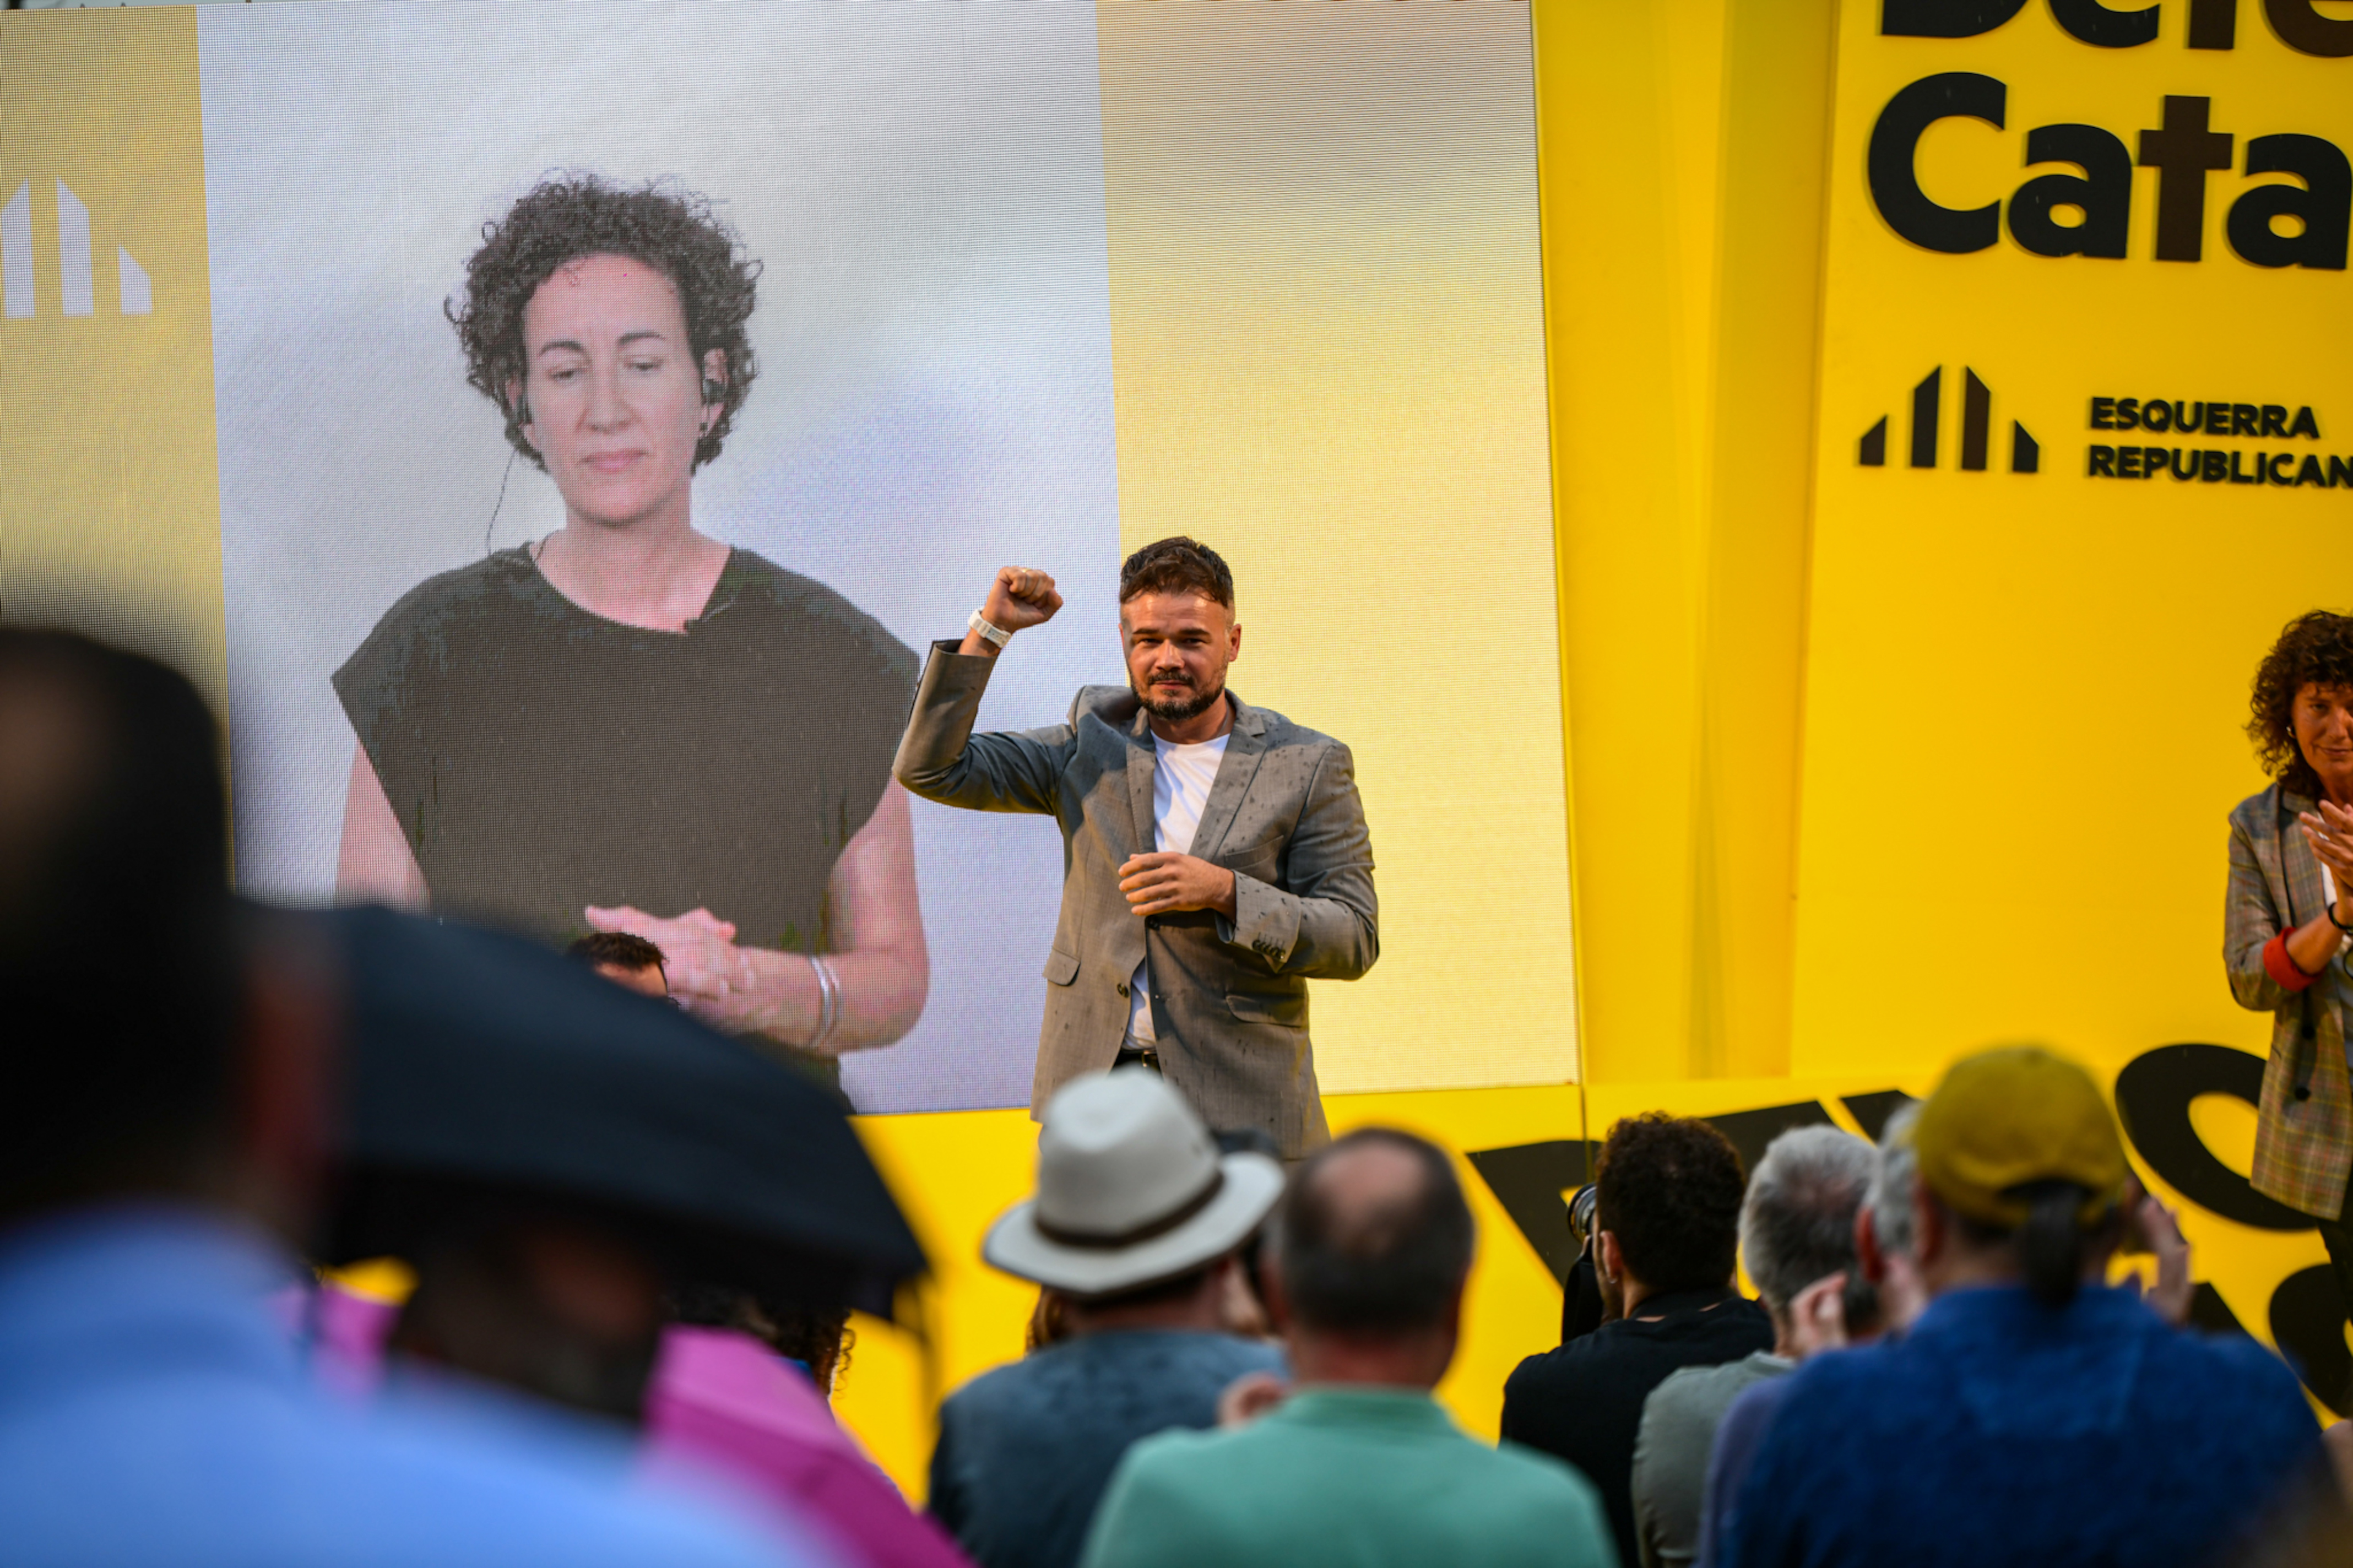 Esquerra Republicana de Catalunya candidate for the July 23 Spanish election Gabriel Rufián during a speech on July 6, 2023